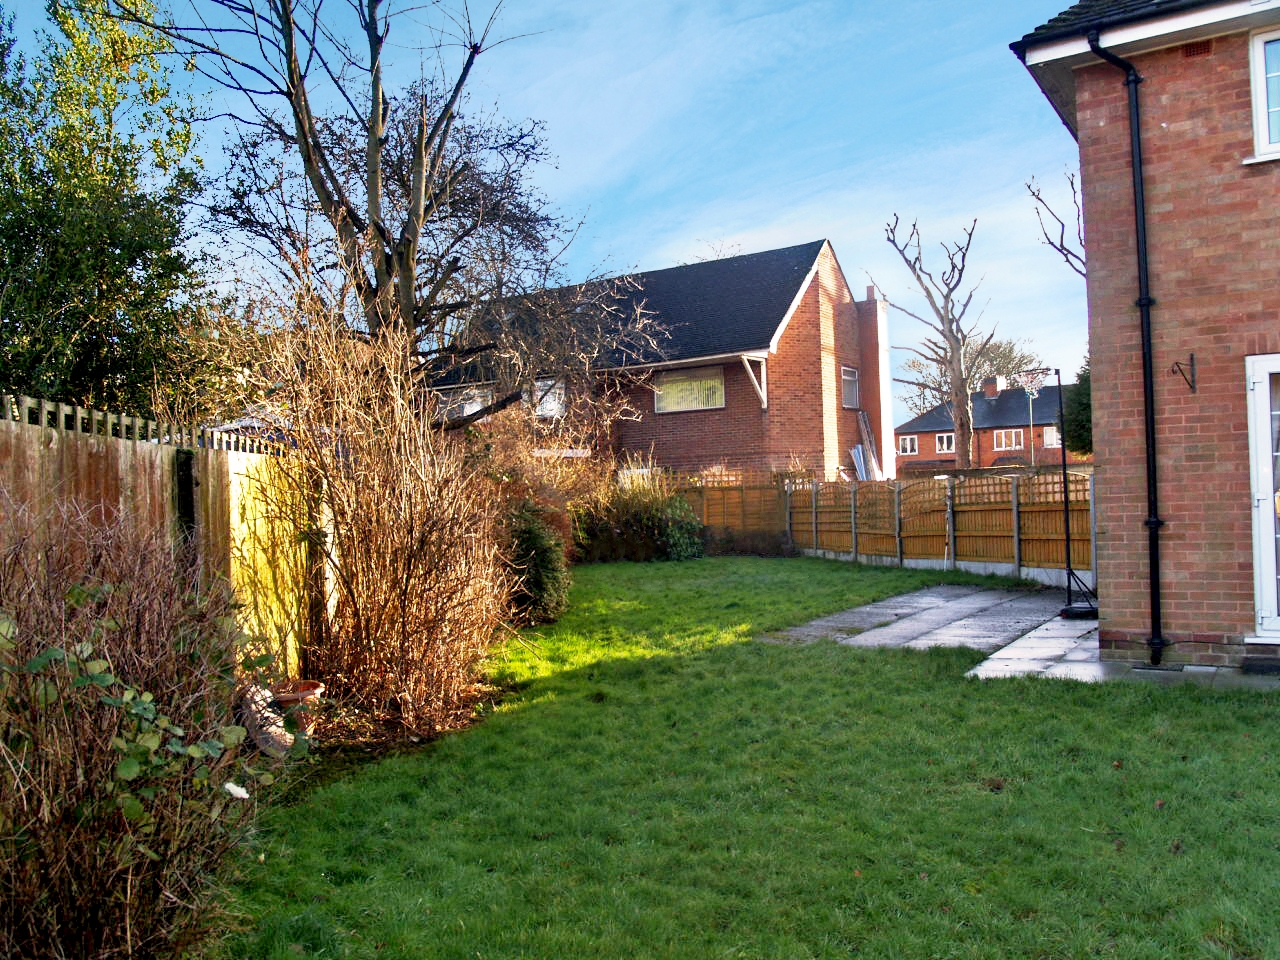 4 bedroom detached house SSTC in Solihull - photograph 17.